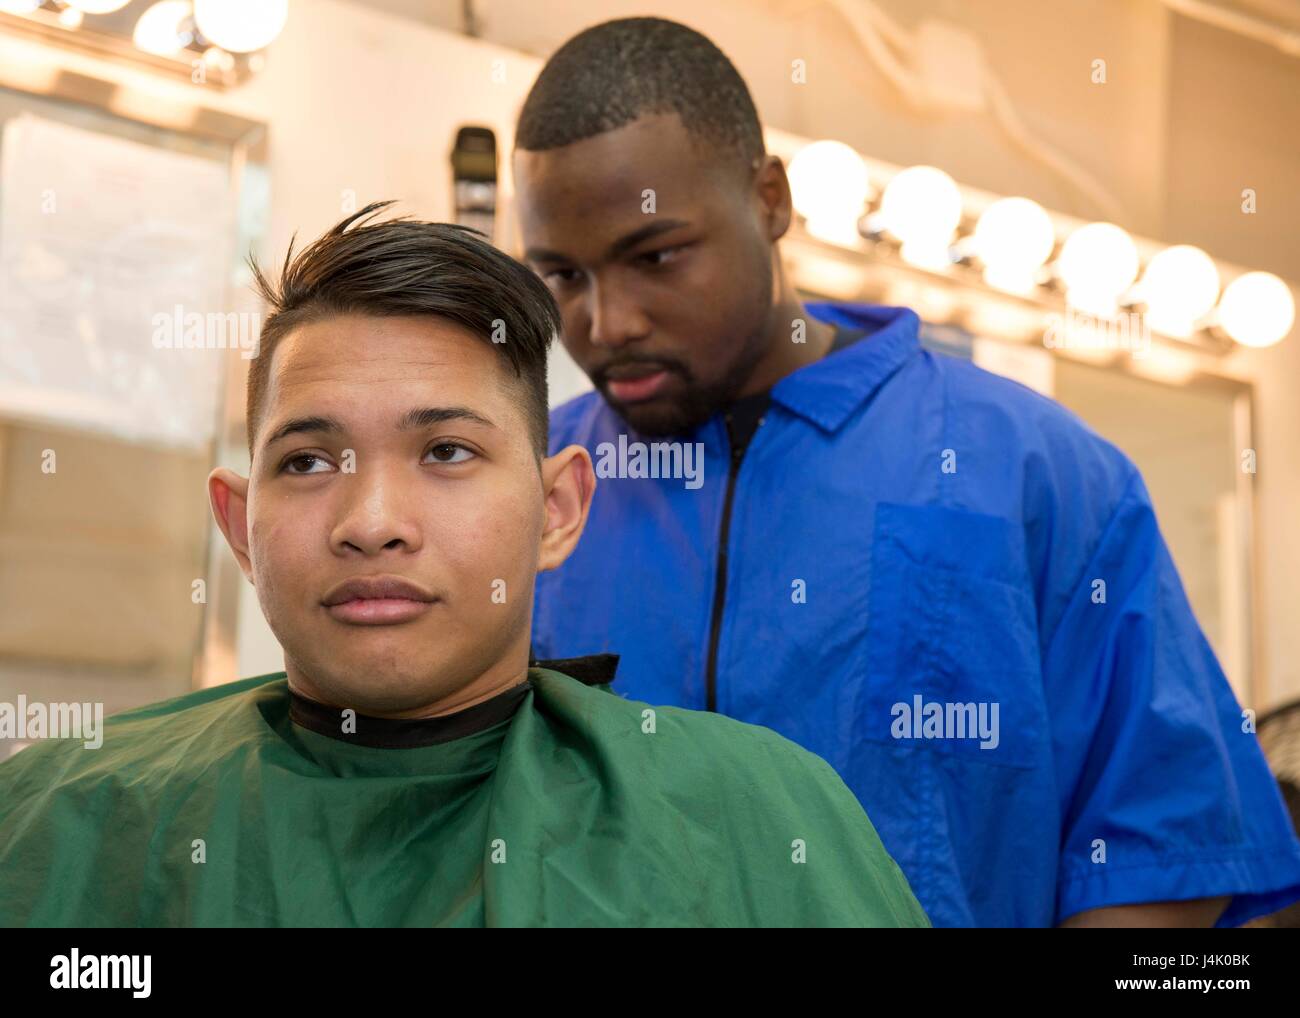 SAN DIEGO (Sept. 30, 2016) Petty Officer 3rd Class Breyon Holland gives Seaman Yuri Estrella a haircut in the ship’s enlisted barber shop onboard amphibious assault ship USS Boxer (LHD 4). Boxer returned to its homeport, San Diego, September 12, following a seven-month deployment to the 3rd, 5th, and 7th Fleet areas of operation. (U.S. Navy photo by Petty Officer 3rd Class Jesse Monford/Released) Stock Photo